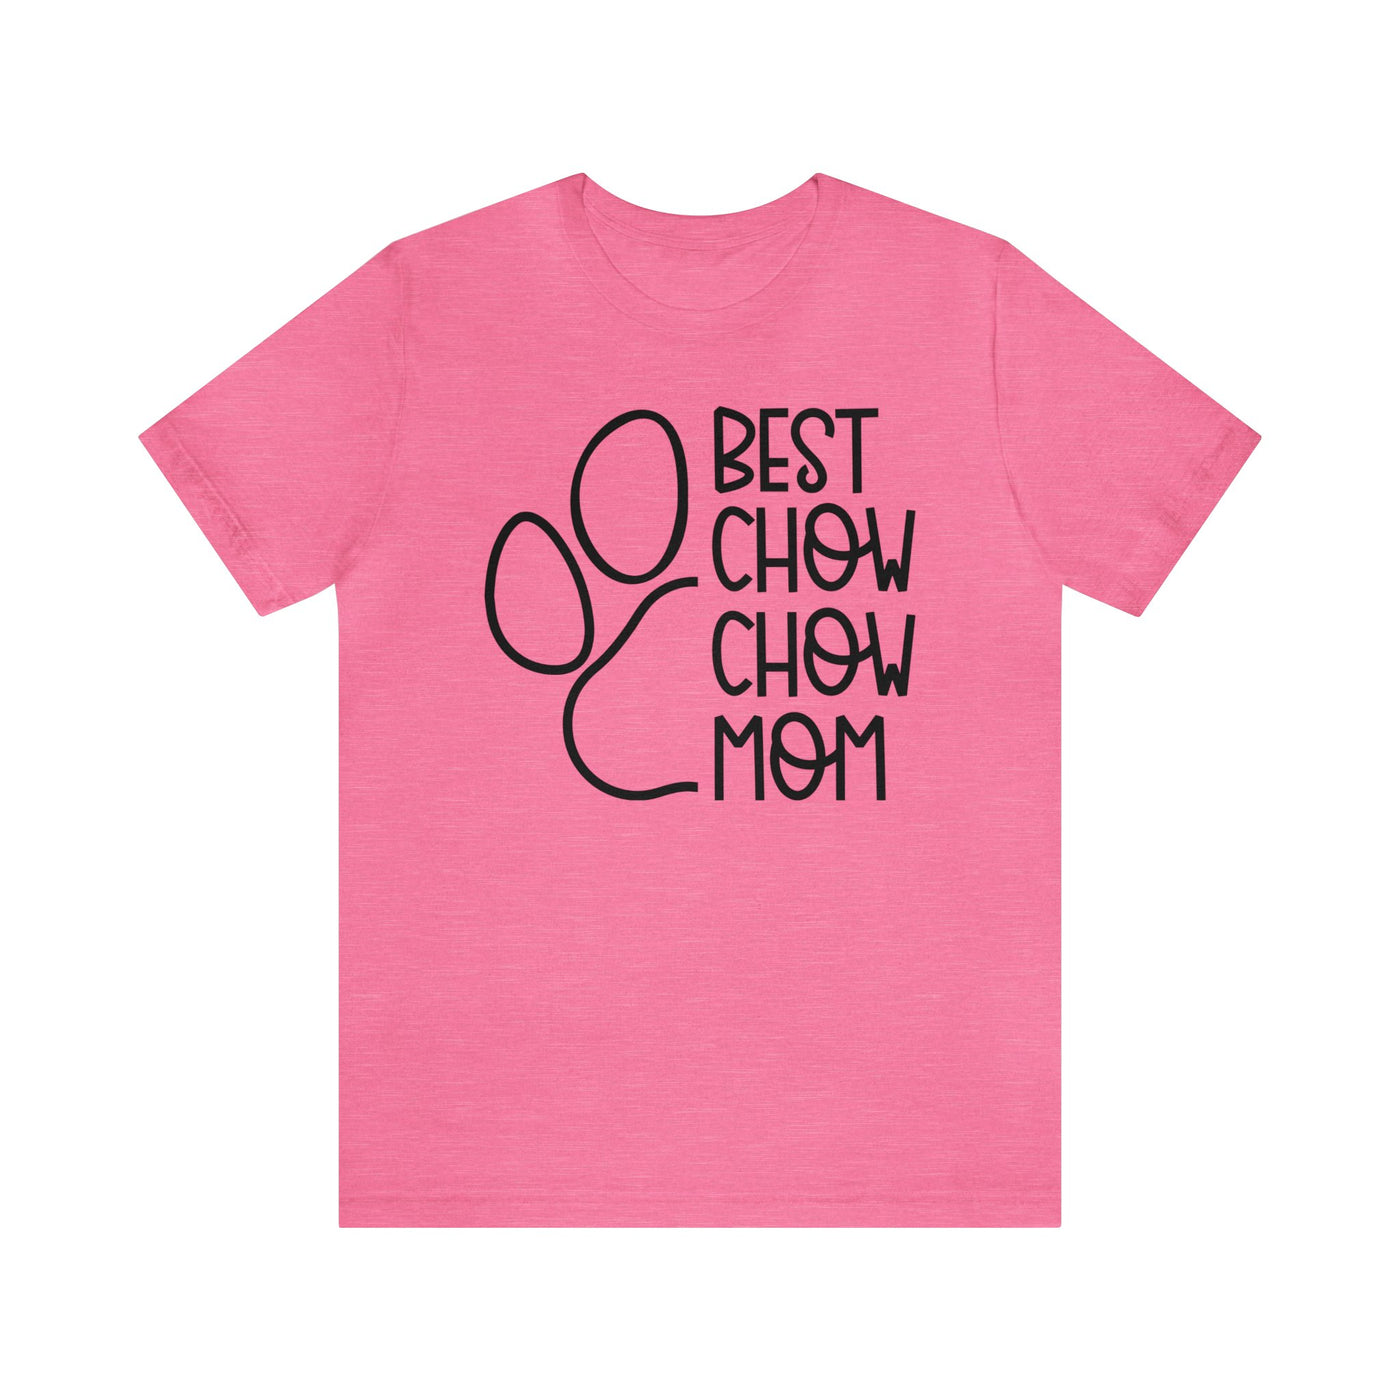 Best Chow Chow Mom T-Shirt